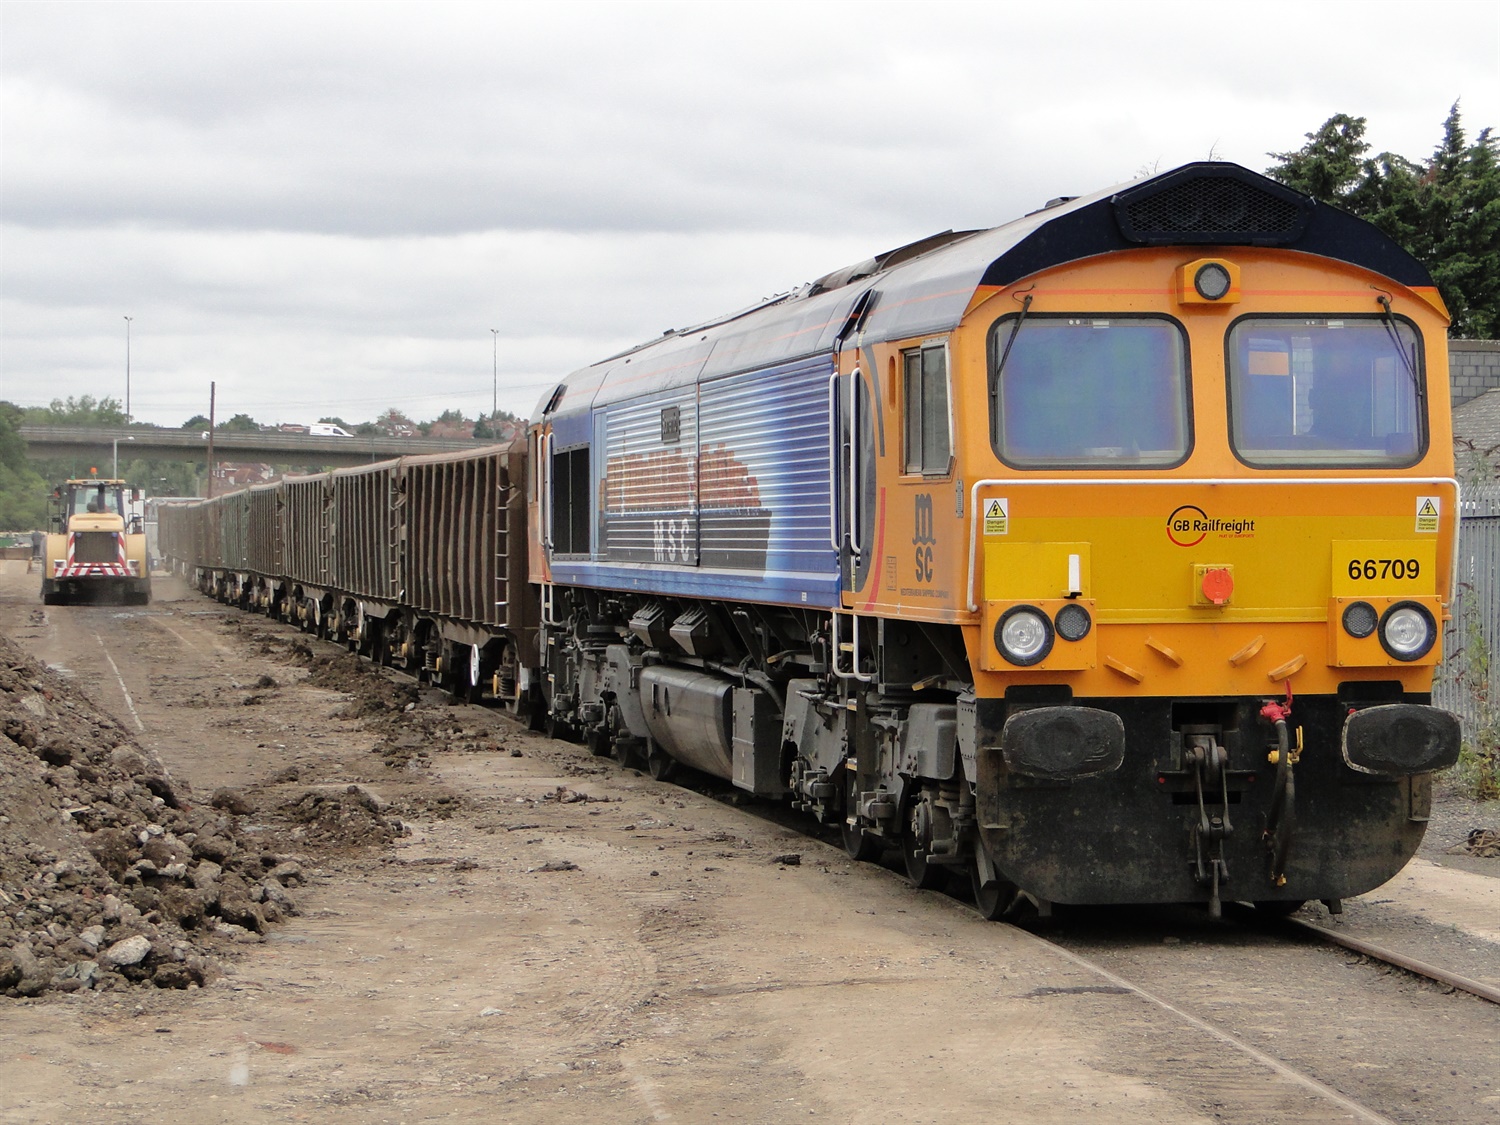 GBRf runs first waste train from new North London Railfreight Terminal